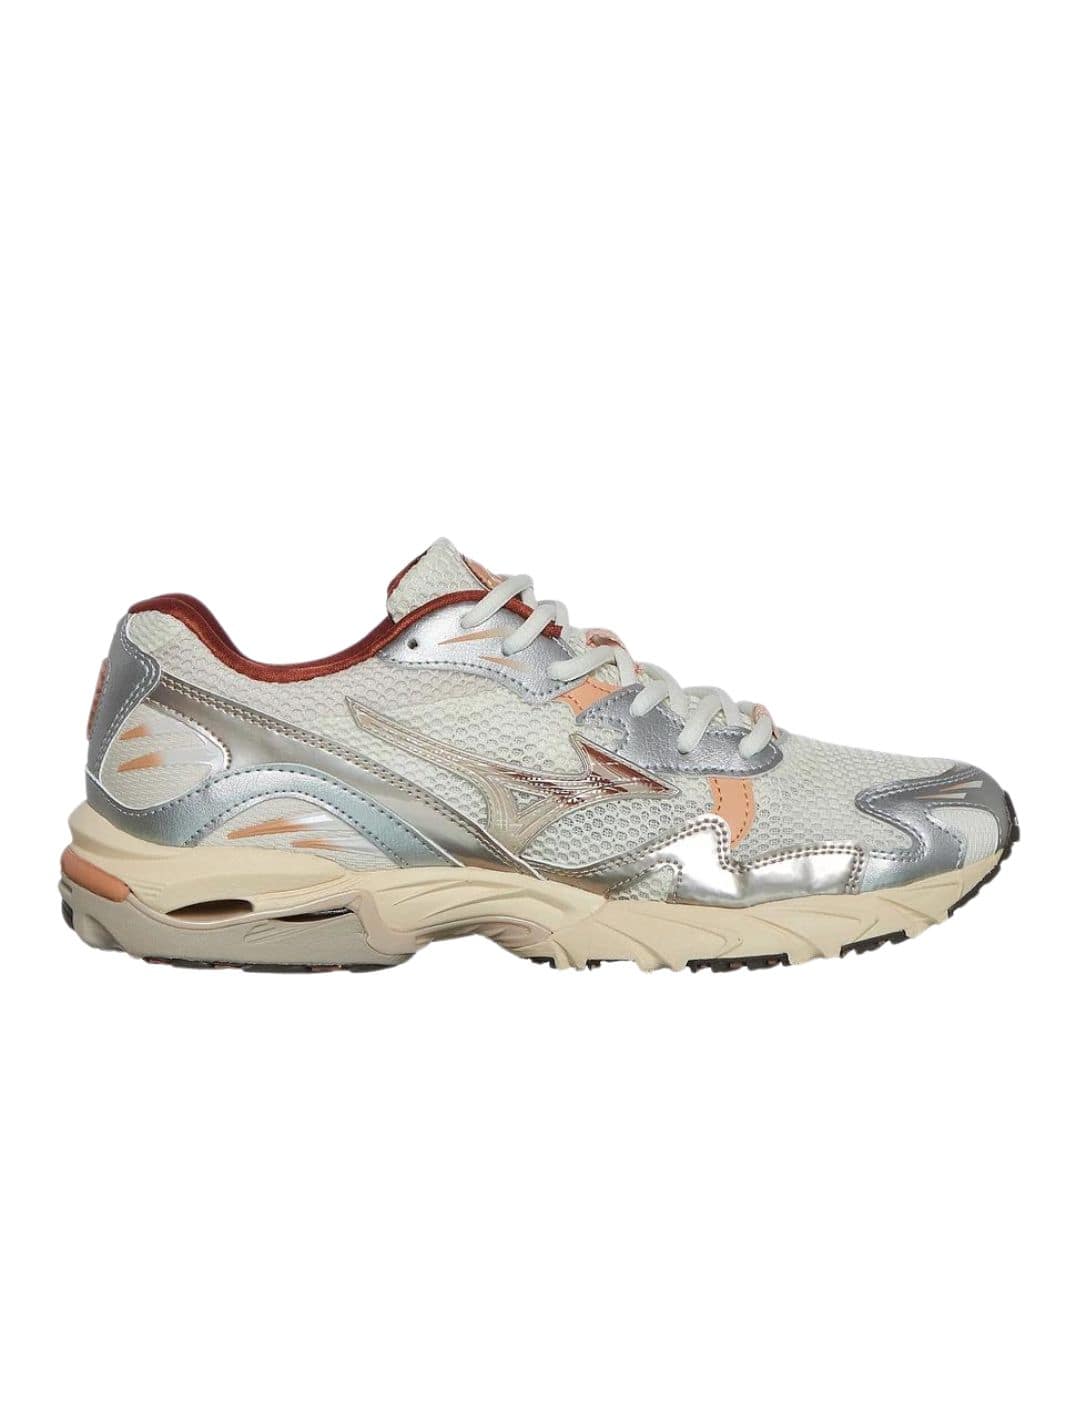 Mizuno Shoes Sneakers | Wave Rider 10 Shifting Sand/Snow White